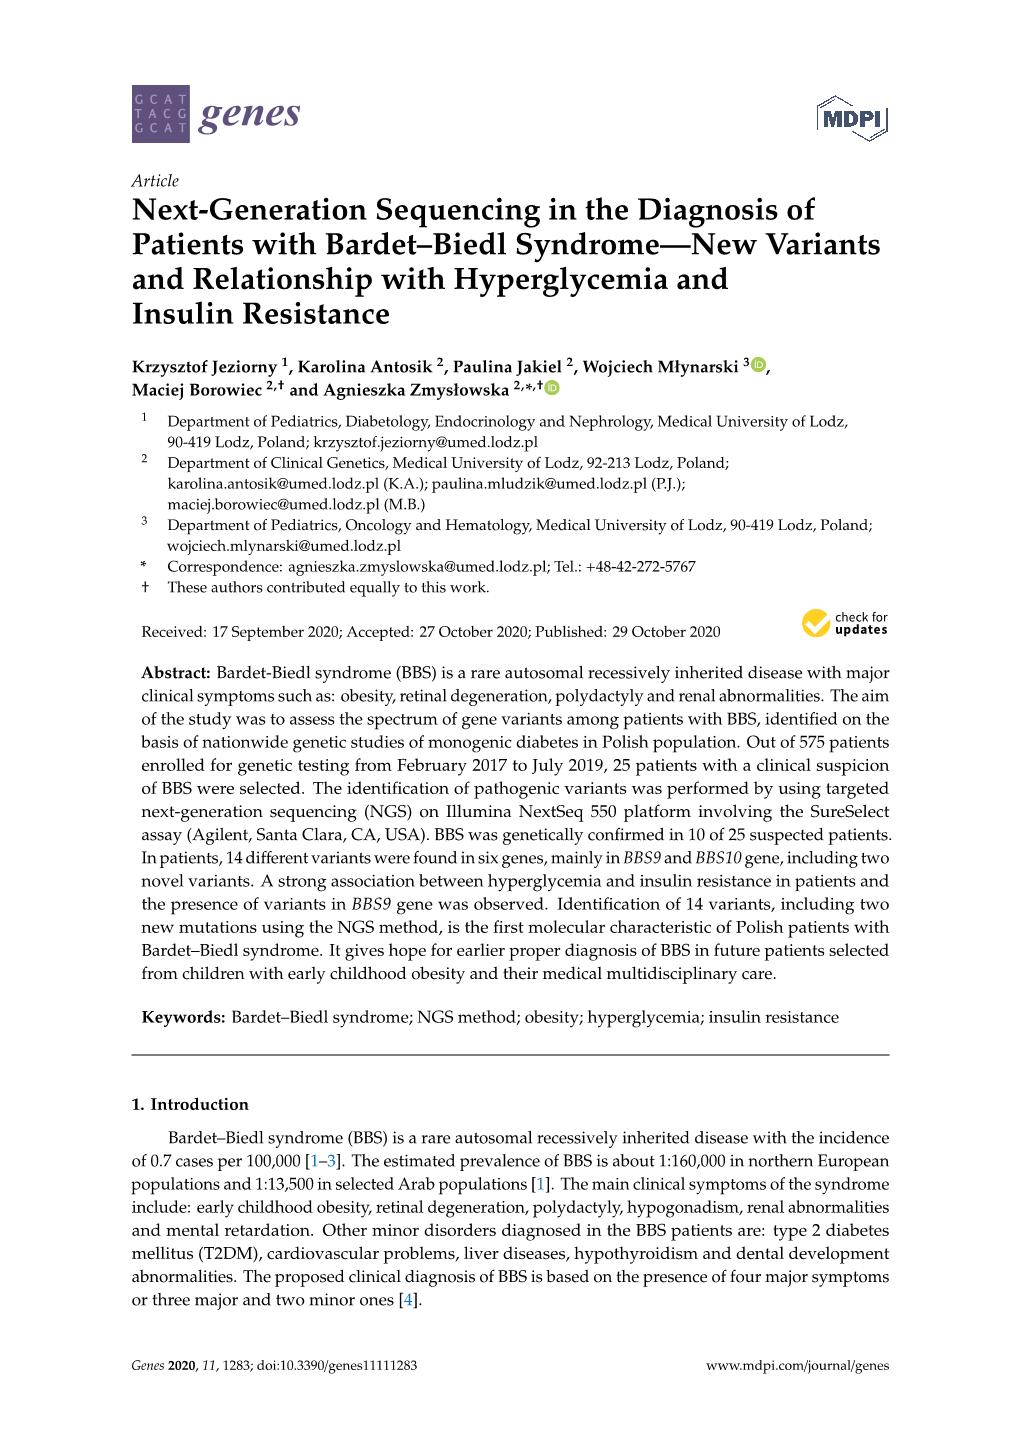 Next-Generation Sequencing in the Diagnosis of Patients with Bardet–Biedl Syndrome—New Variants and Relationship with Hyperglycemia and Insulin Resistance